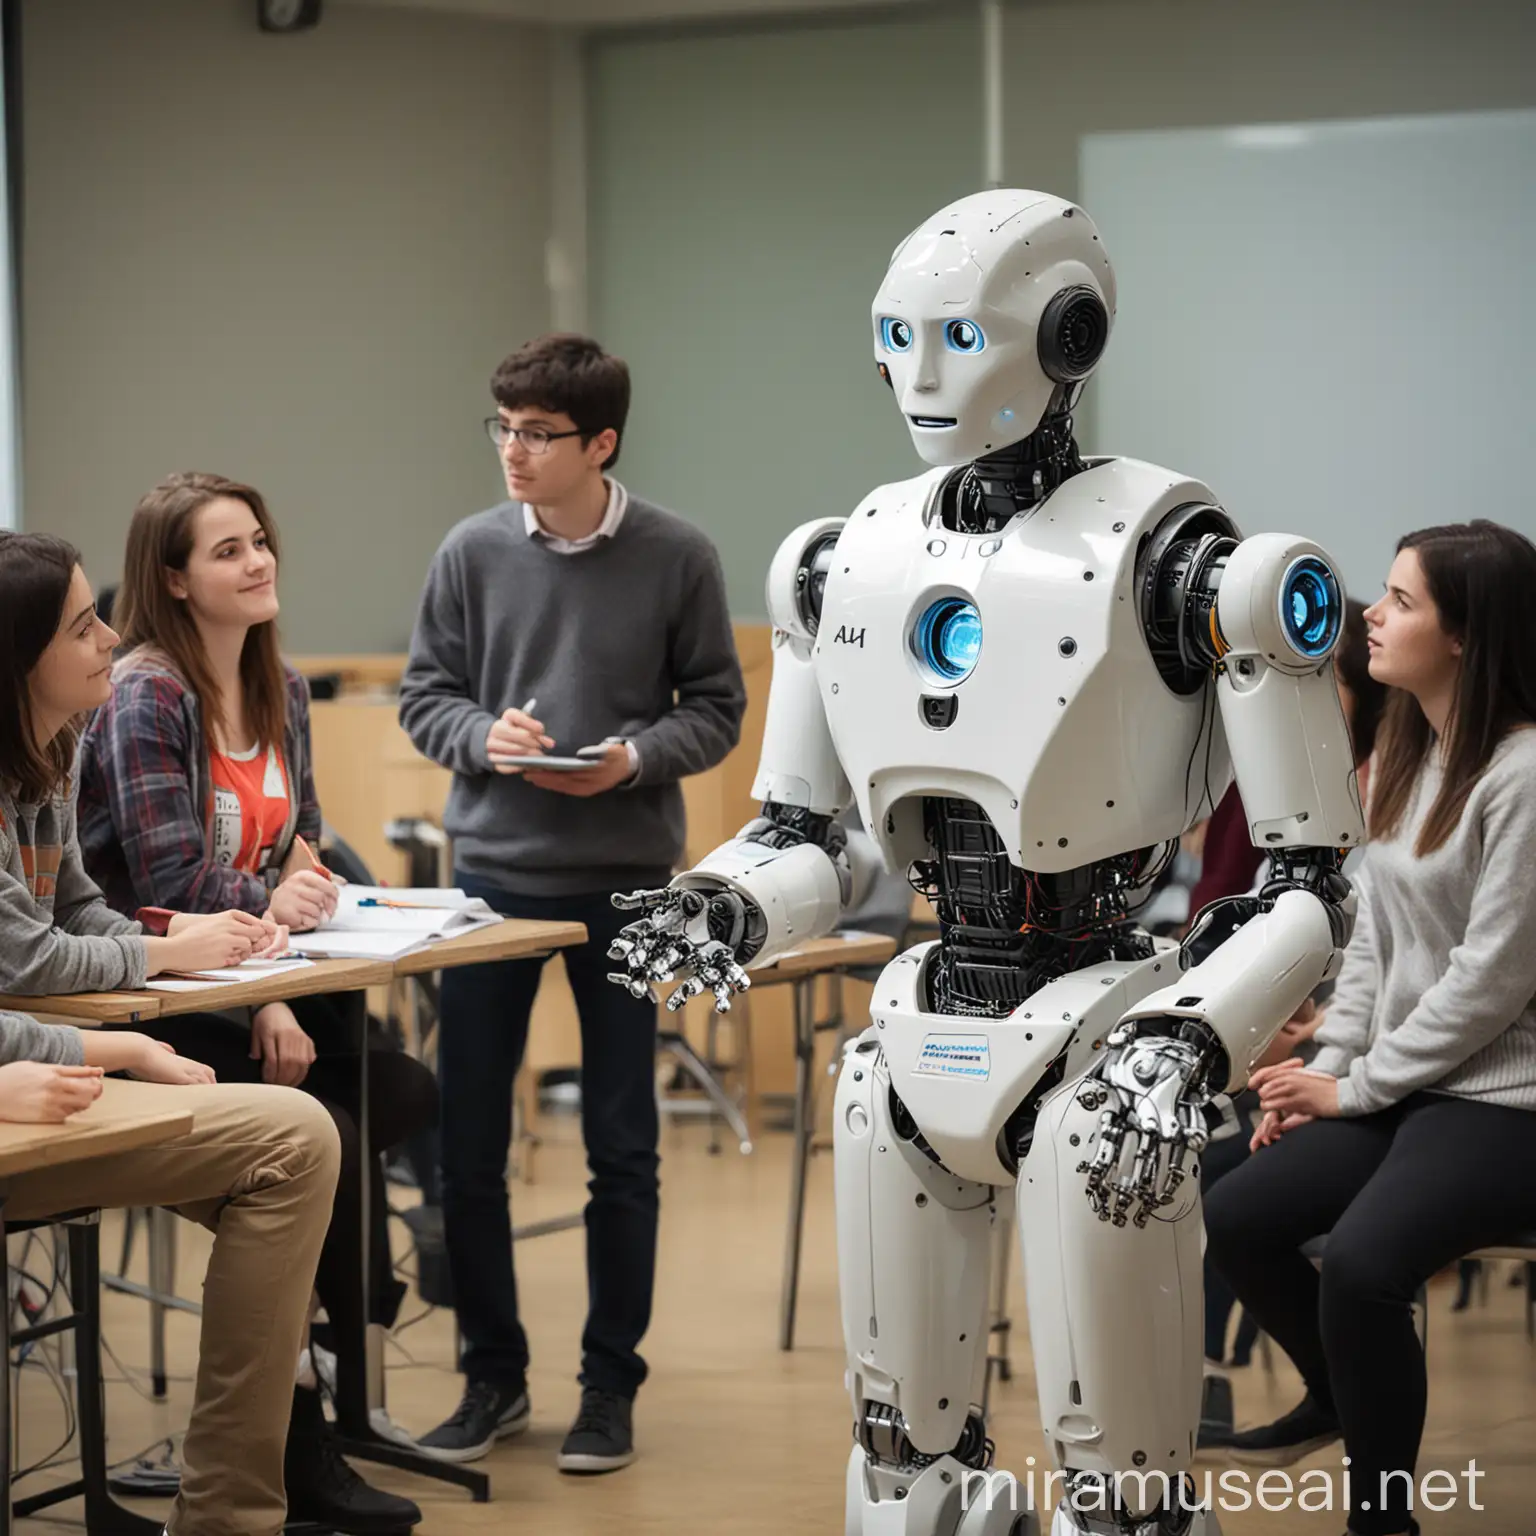 Adult Education Trainer Seeking Guidance from Robot Consultant